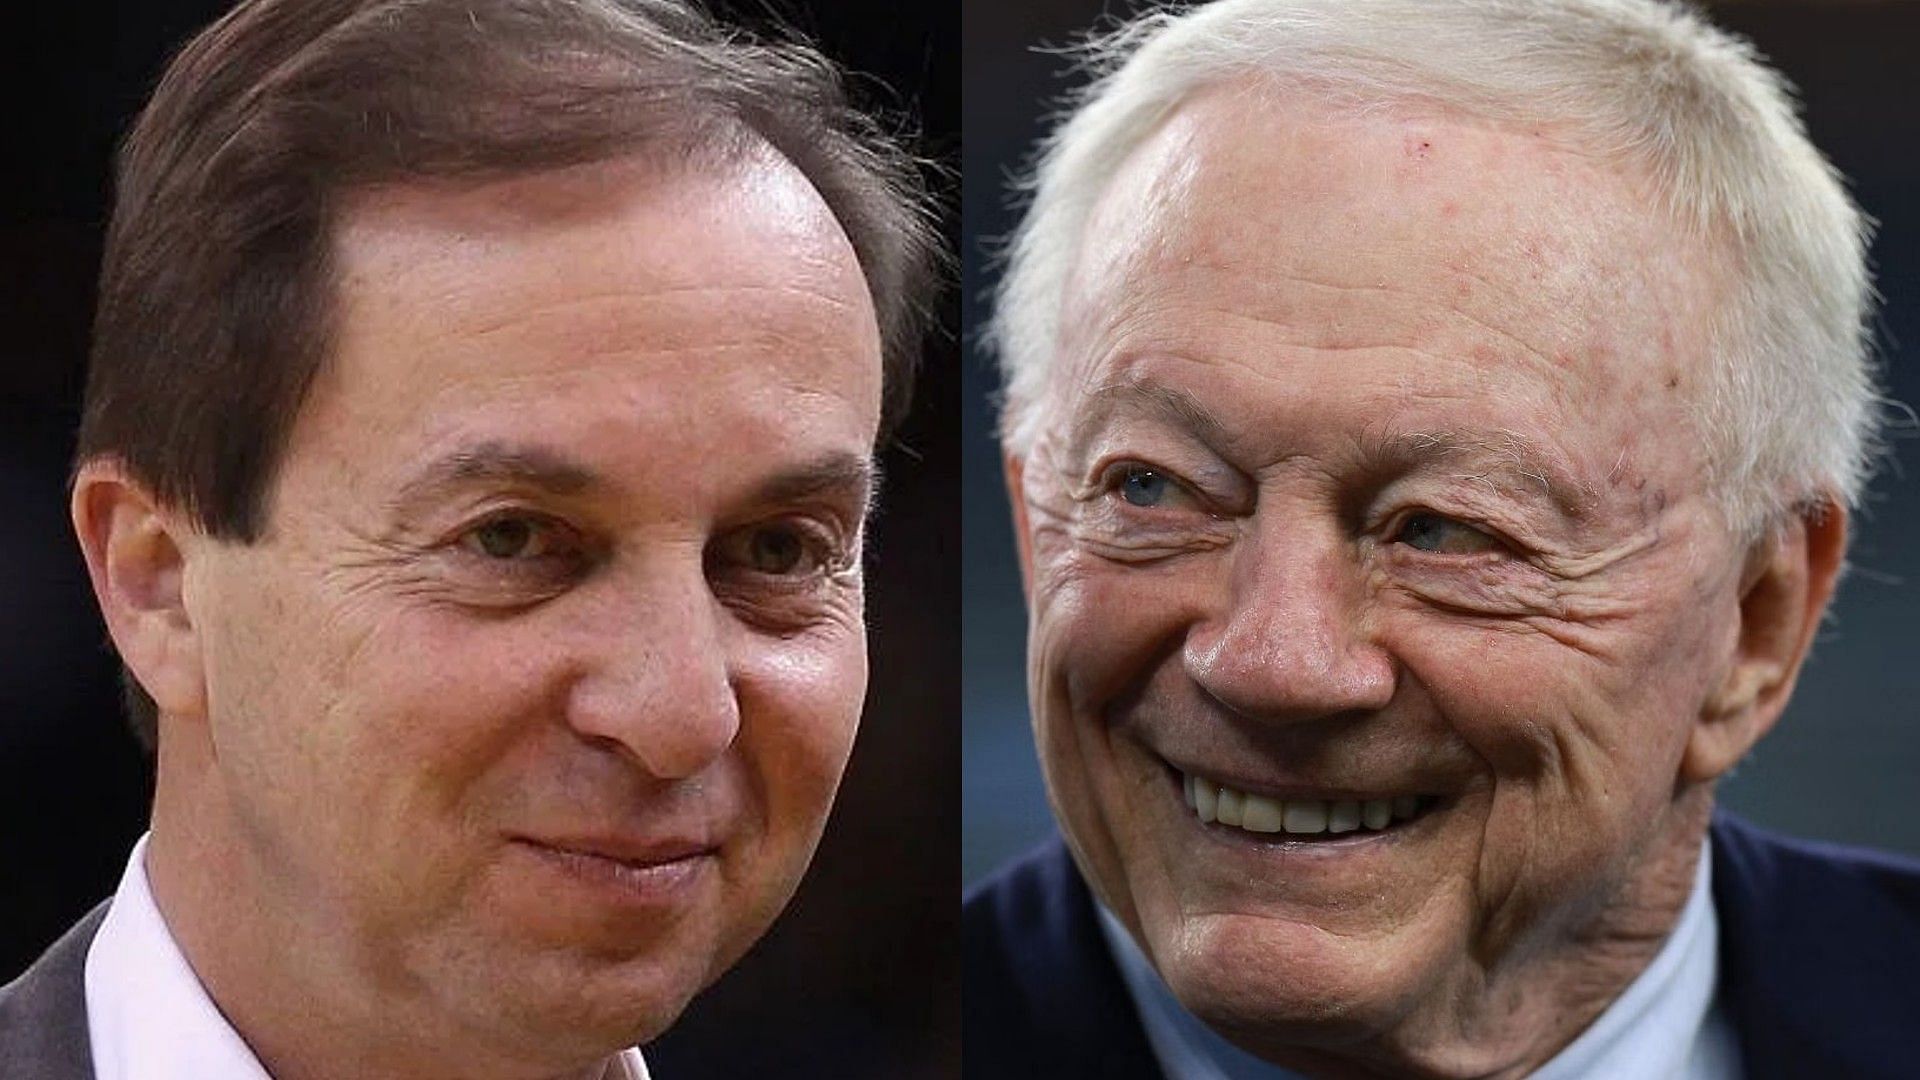 Cowboys owner Jerry Jones gets compared to Golden State Warriors owner Joe Lacob